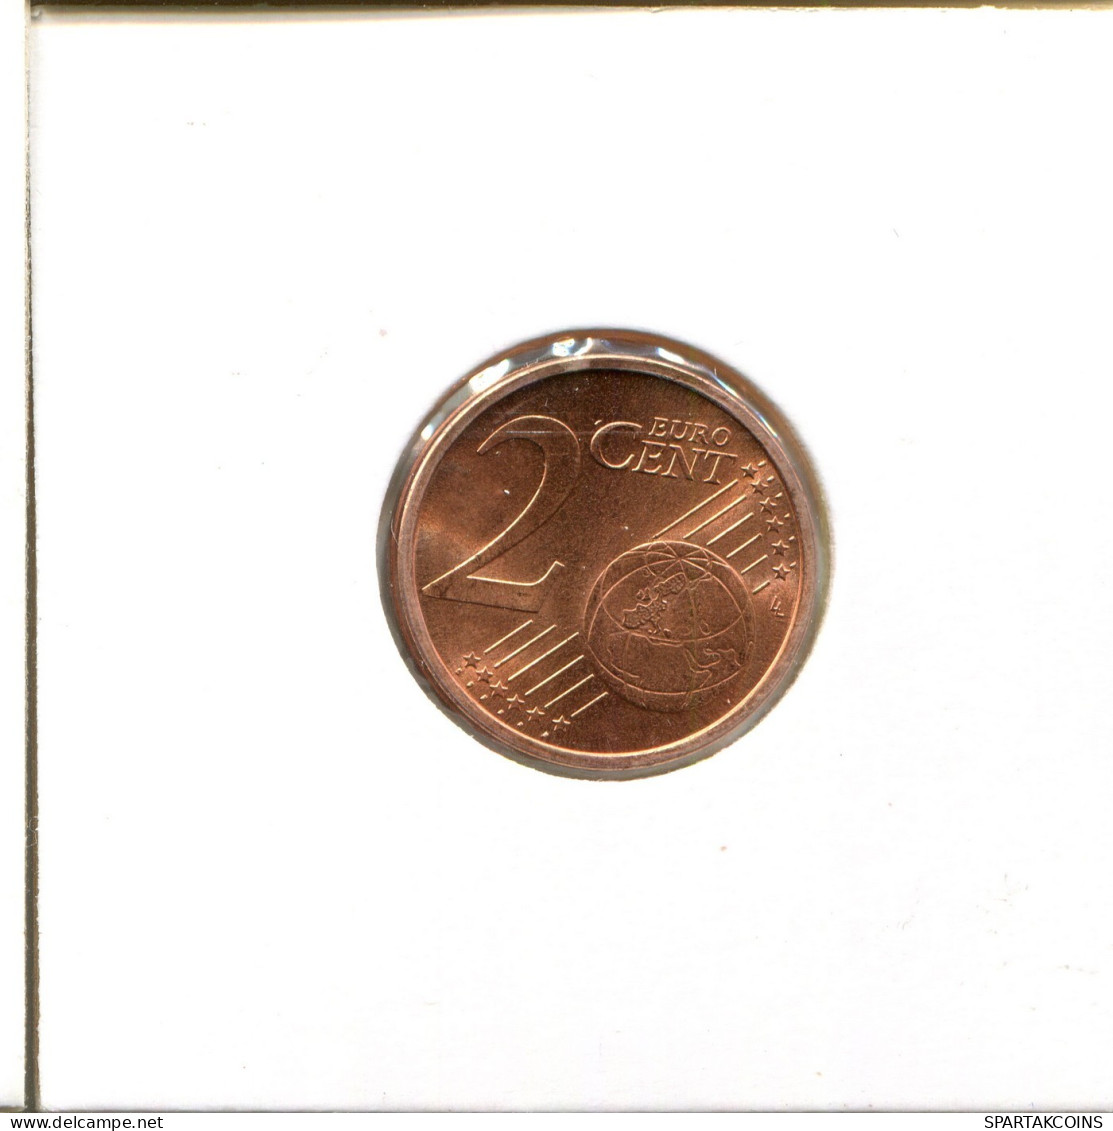 2 EURO CENTS 2004 GERMANY Coin #EU140.U.A - Allemagne